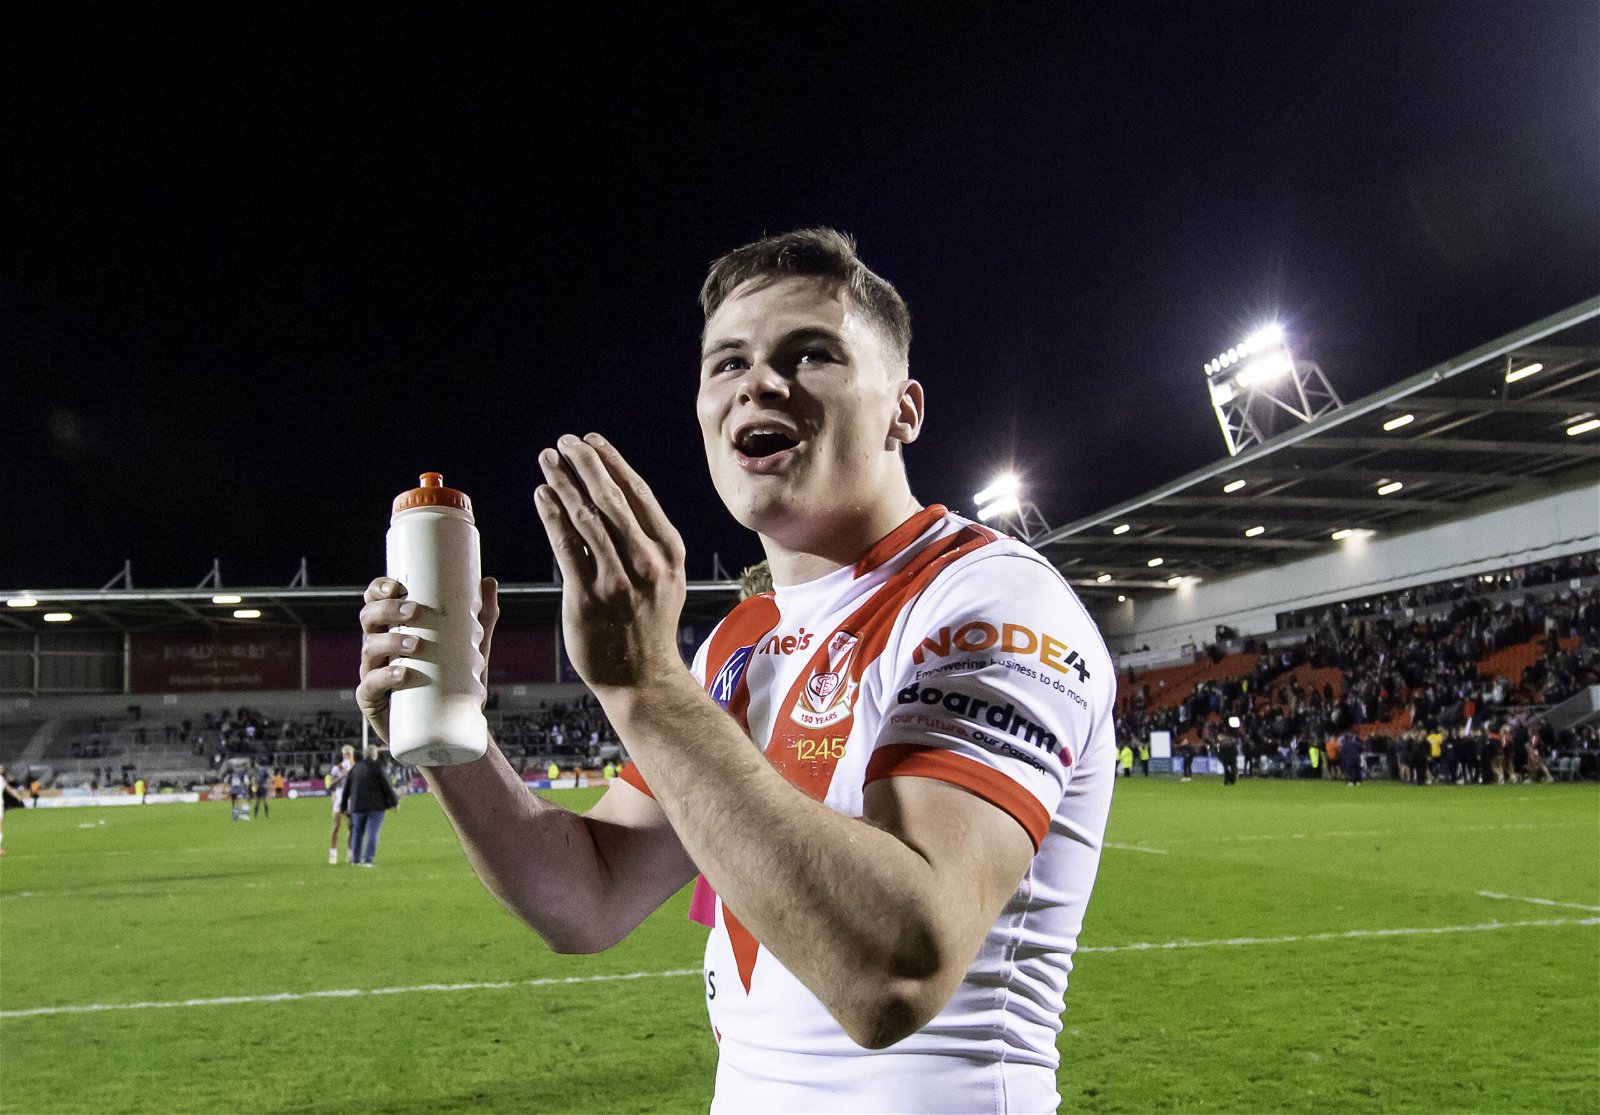 Jack Welsby impressed once again for St Helens in their victory over Salford Red Devils.